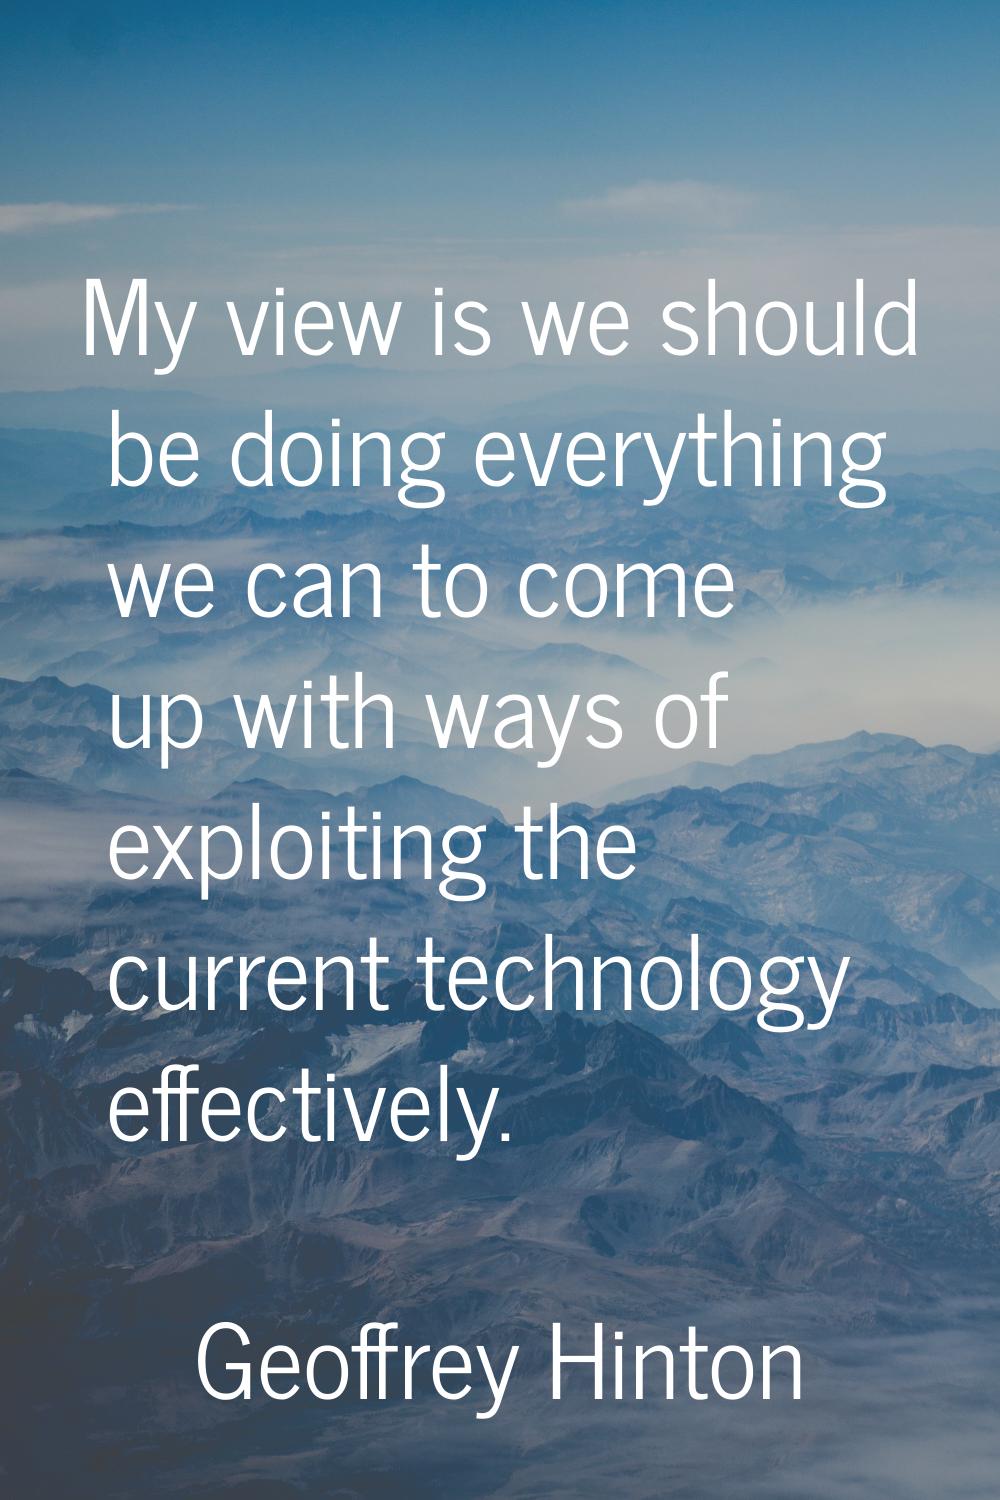 My view is we should be doing everything we can to come up with ways of exploiting the current tech